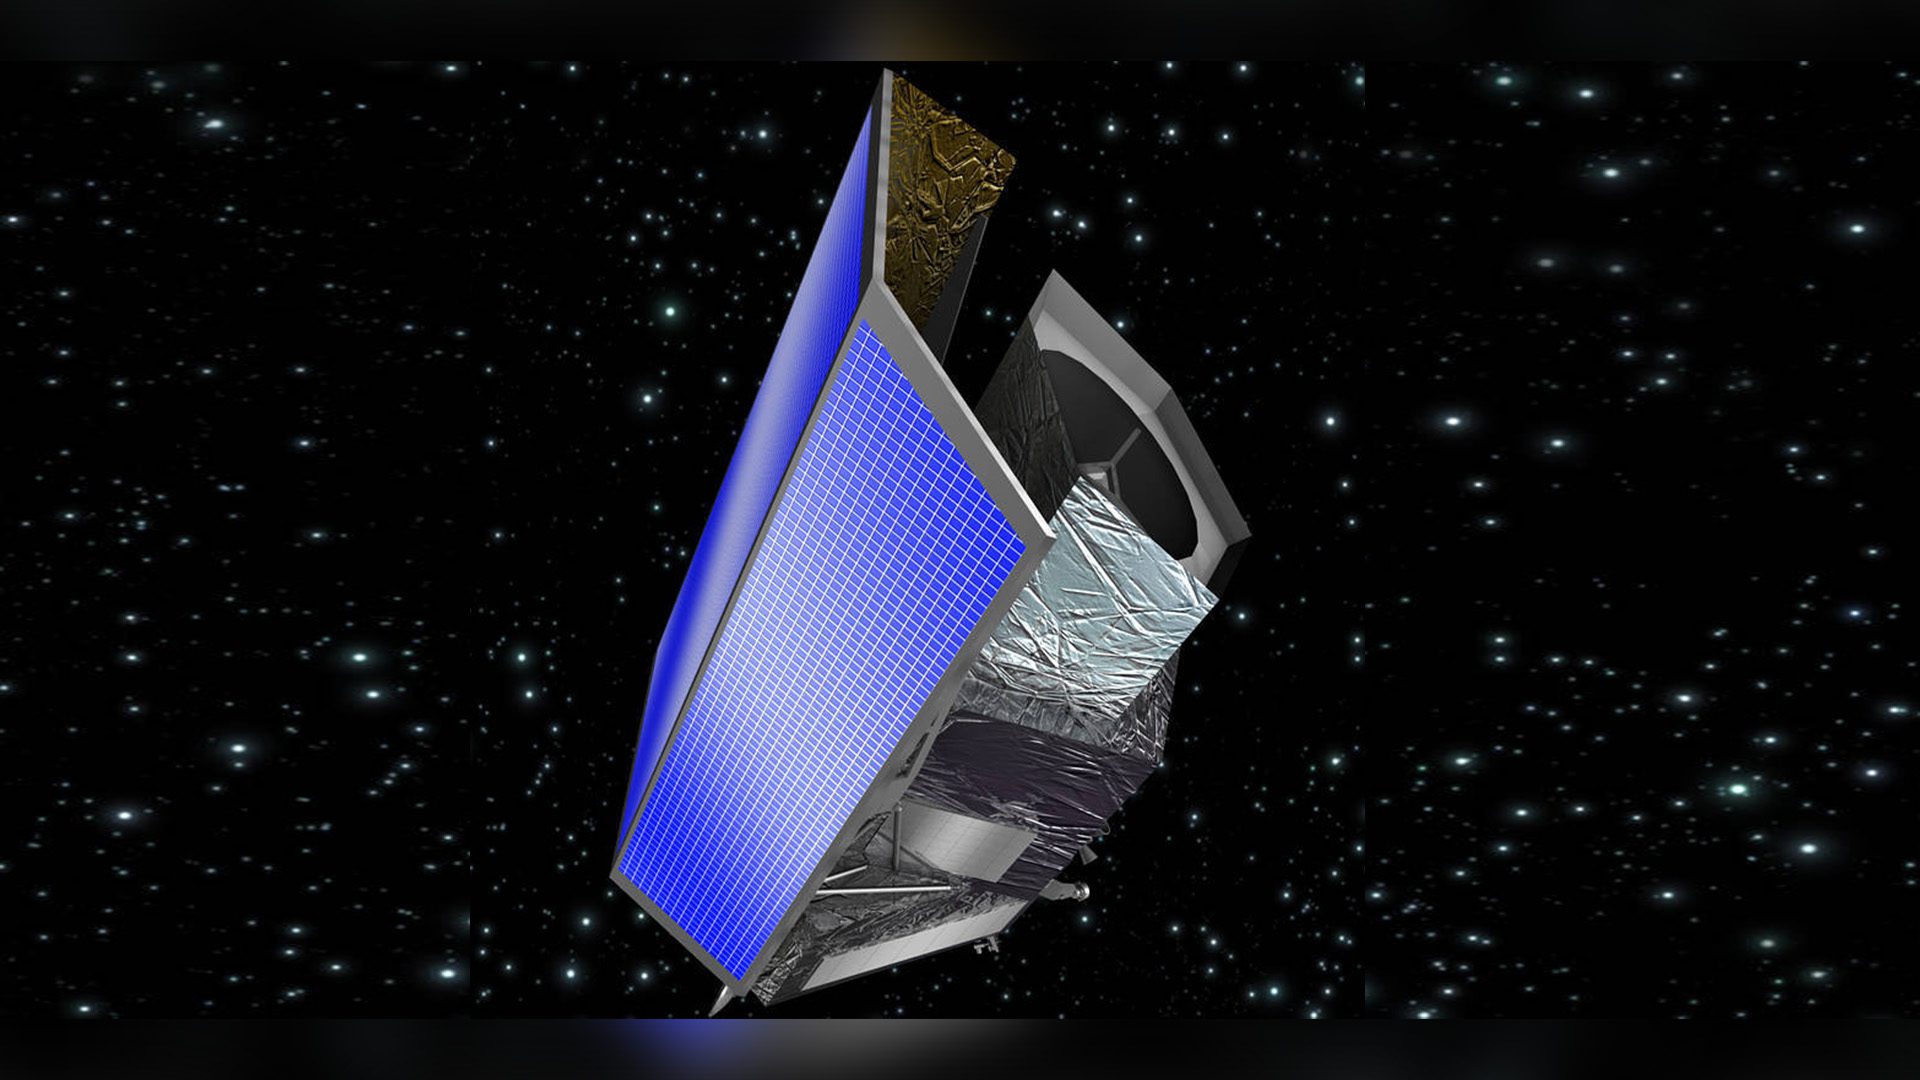 Artist’s rendering of the Euclid spacecraft